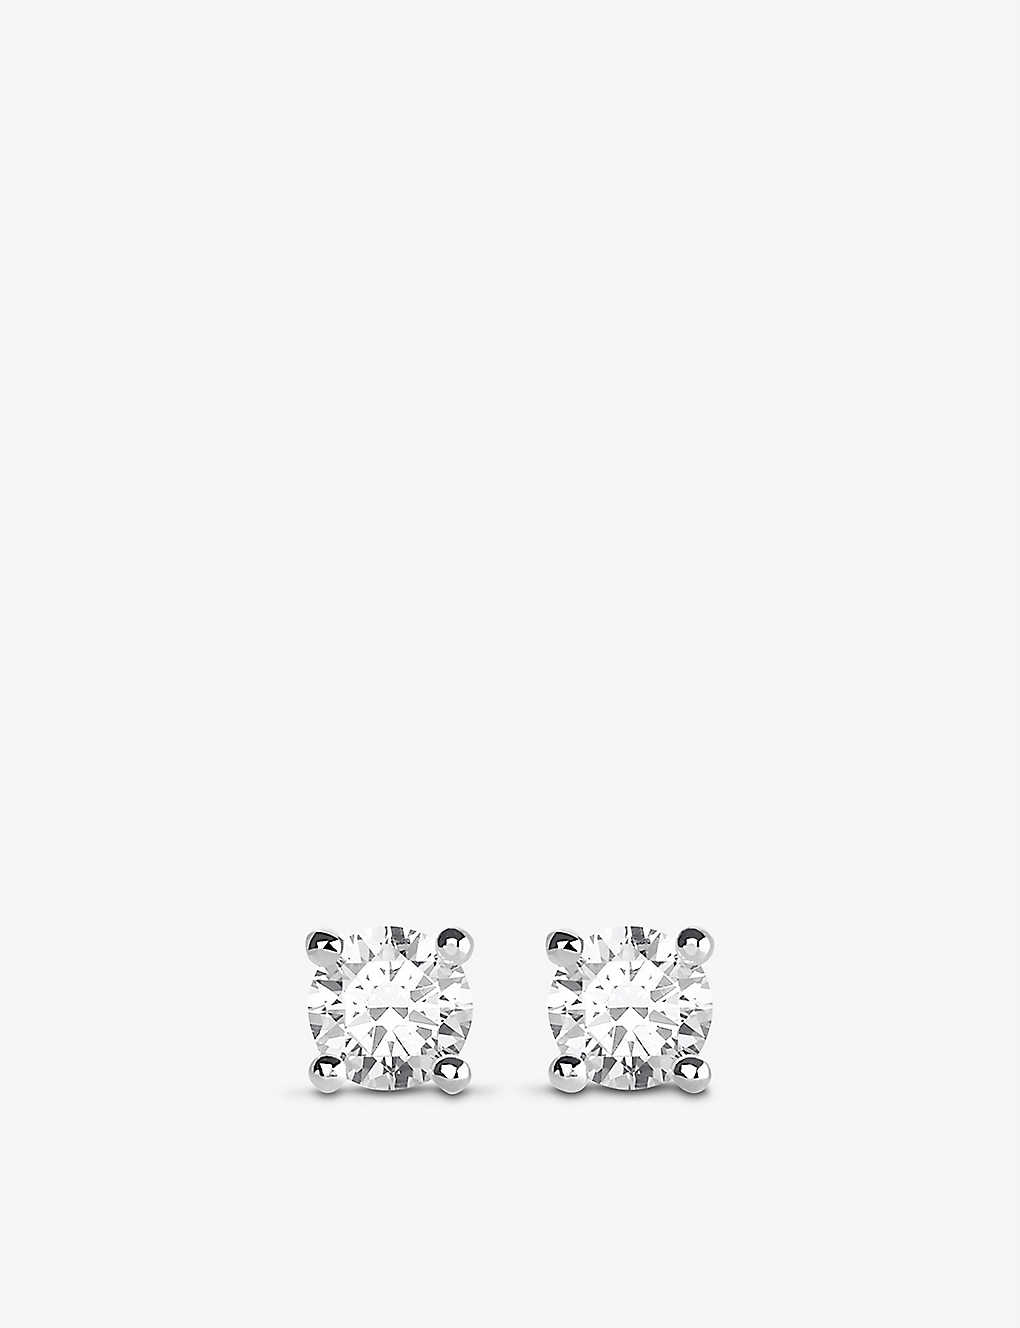 Thomas Sabo Hexagonal Sterling-silver And Cubic Zirconia Stud Earrings In White